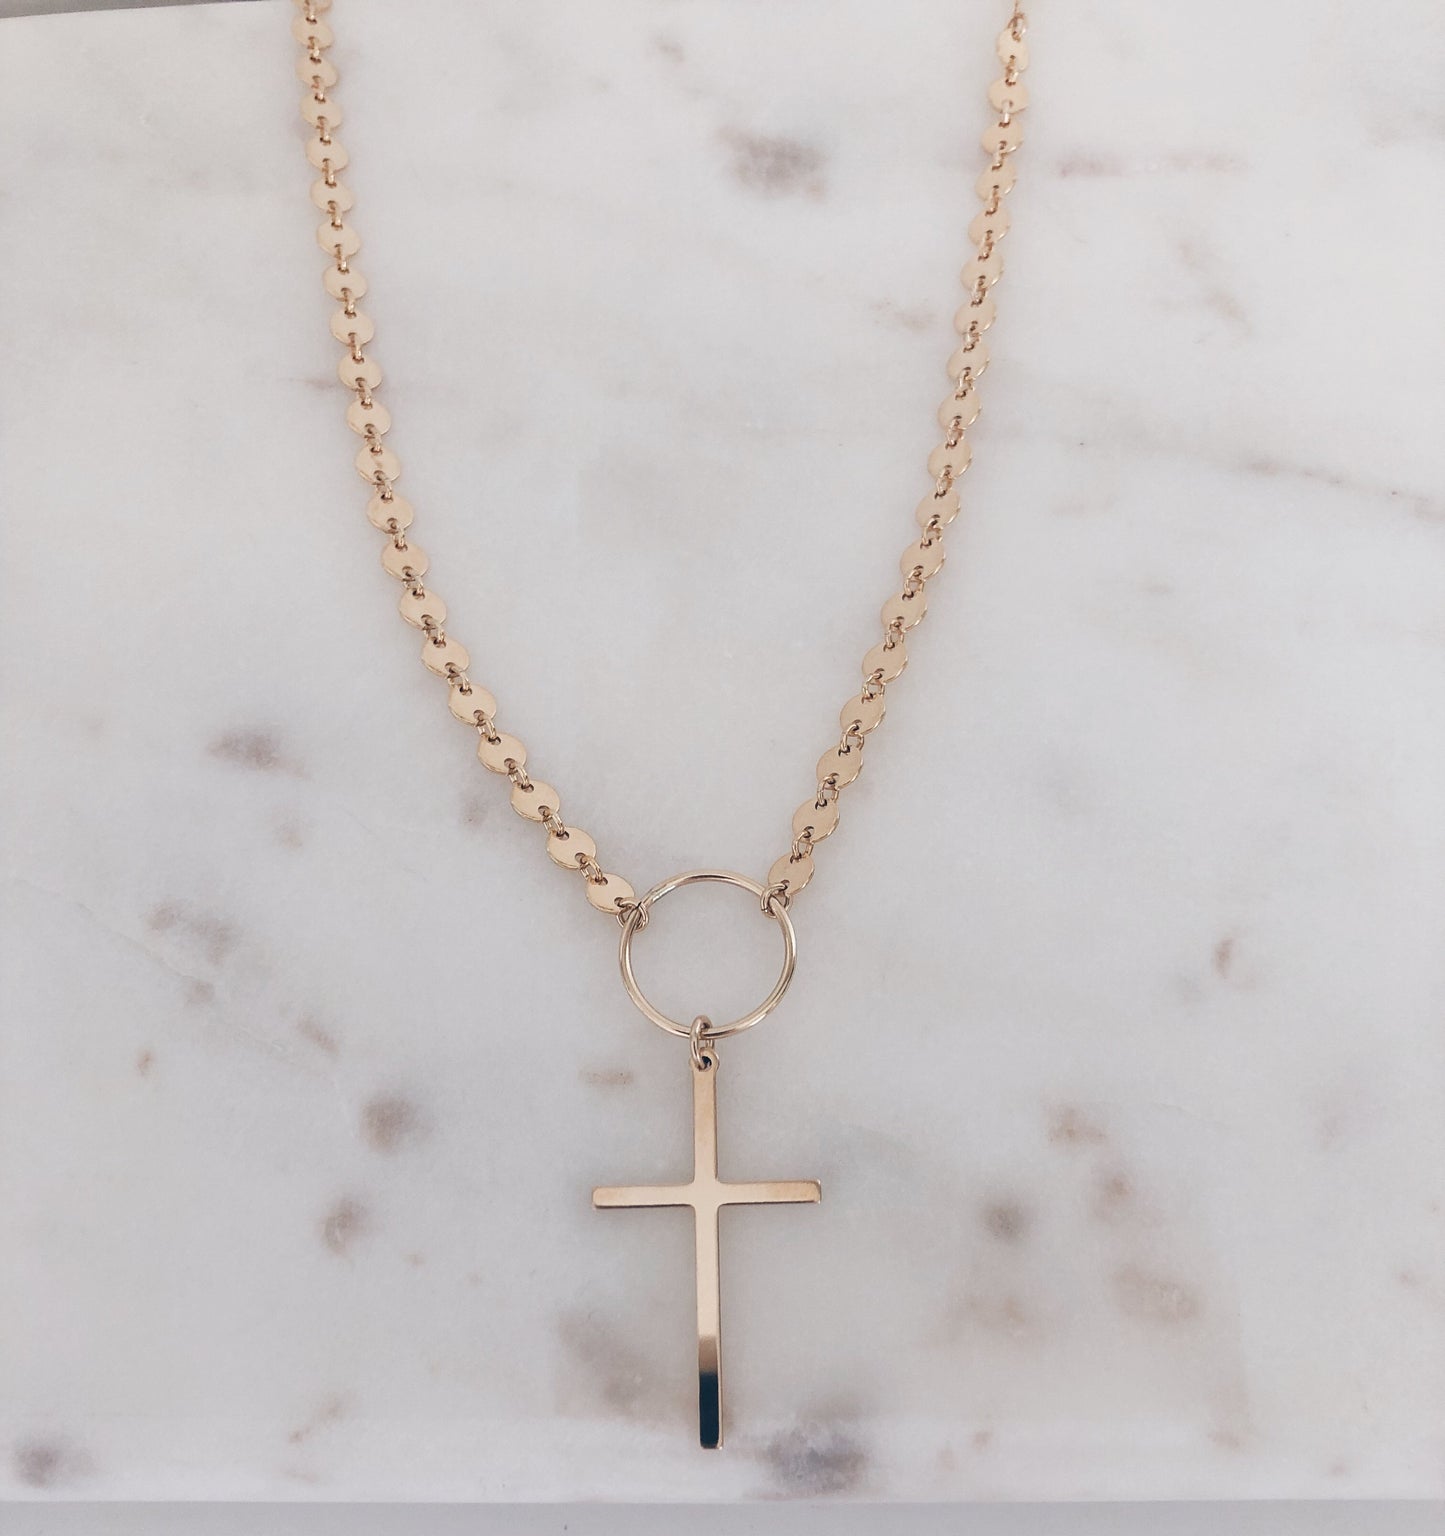 The Creed Necklace